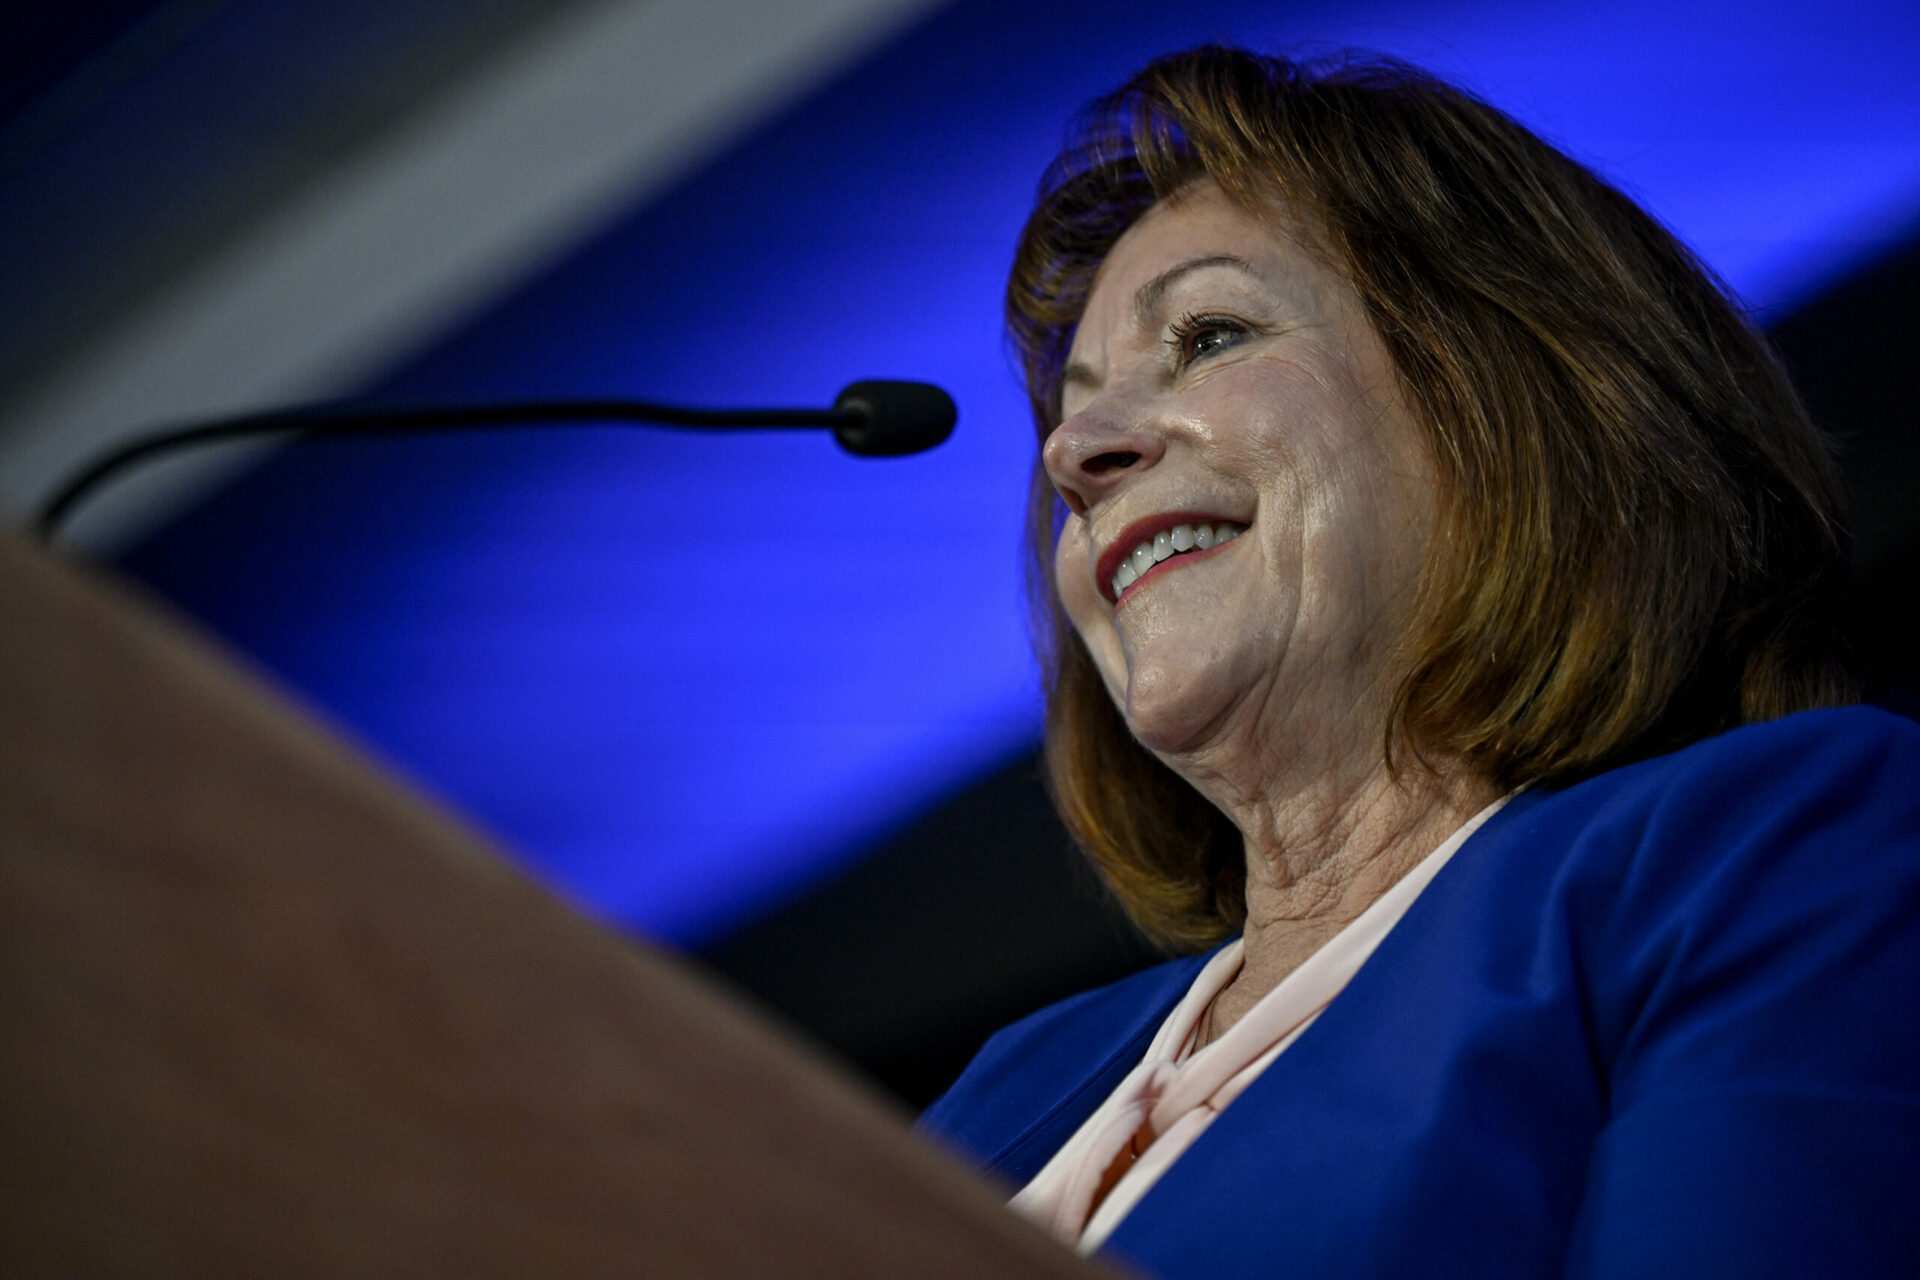 Colorado Lt. Gov. Dianne Primavera hospitalized with unspecified infection